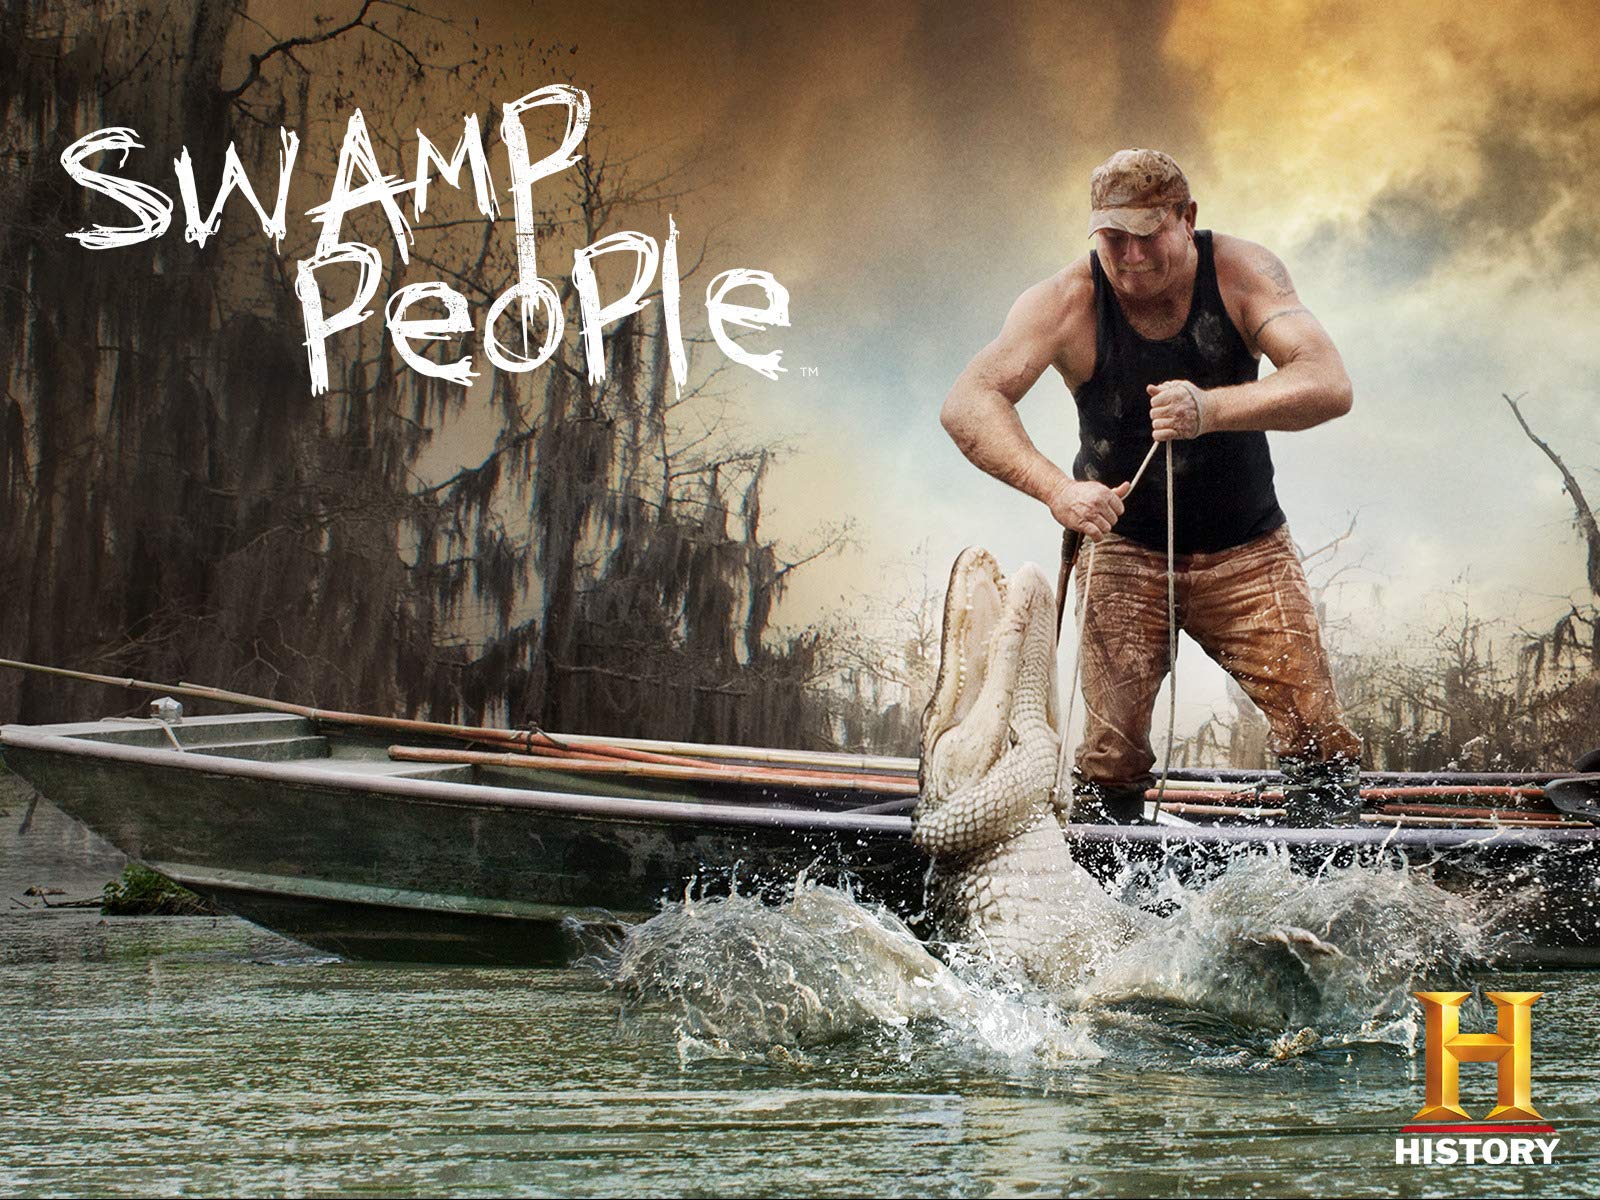 Who died in Swamp People?